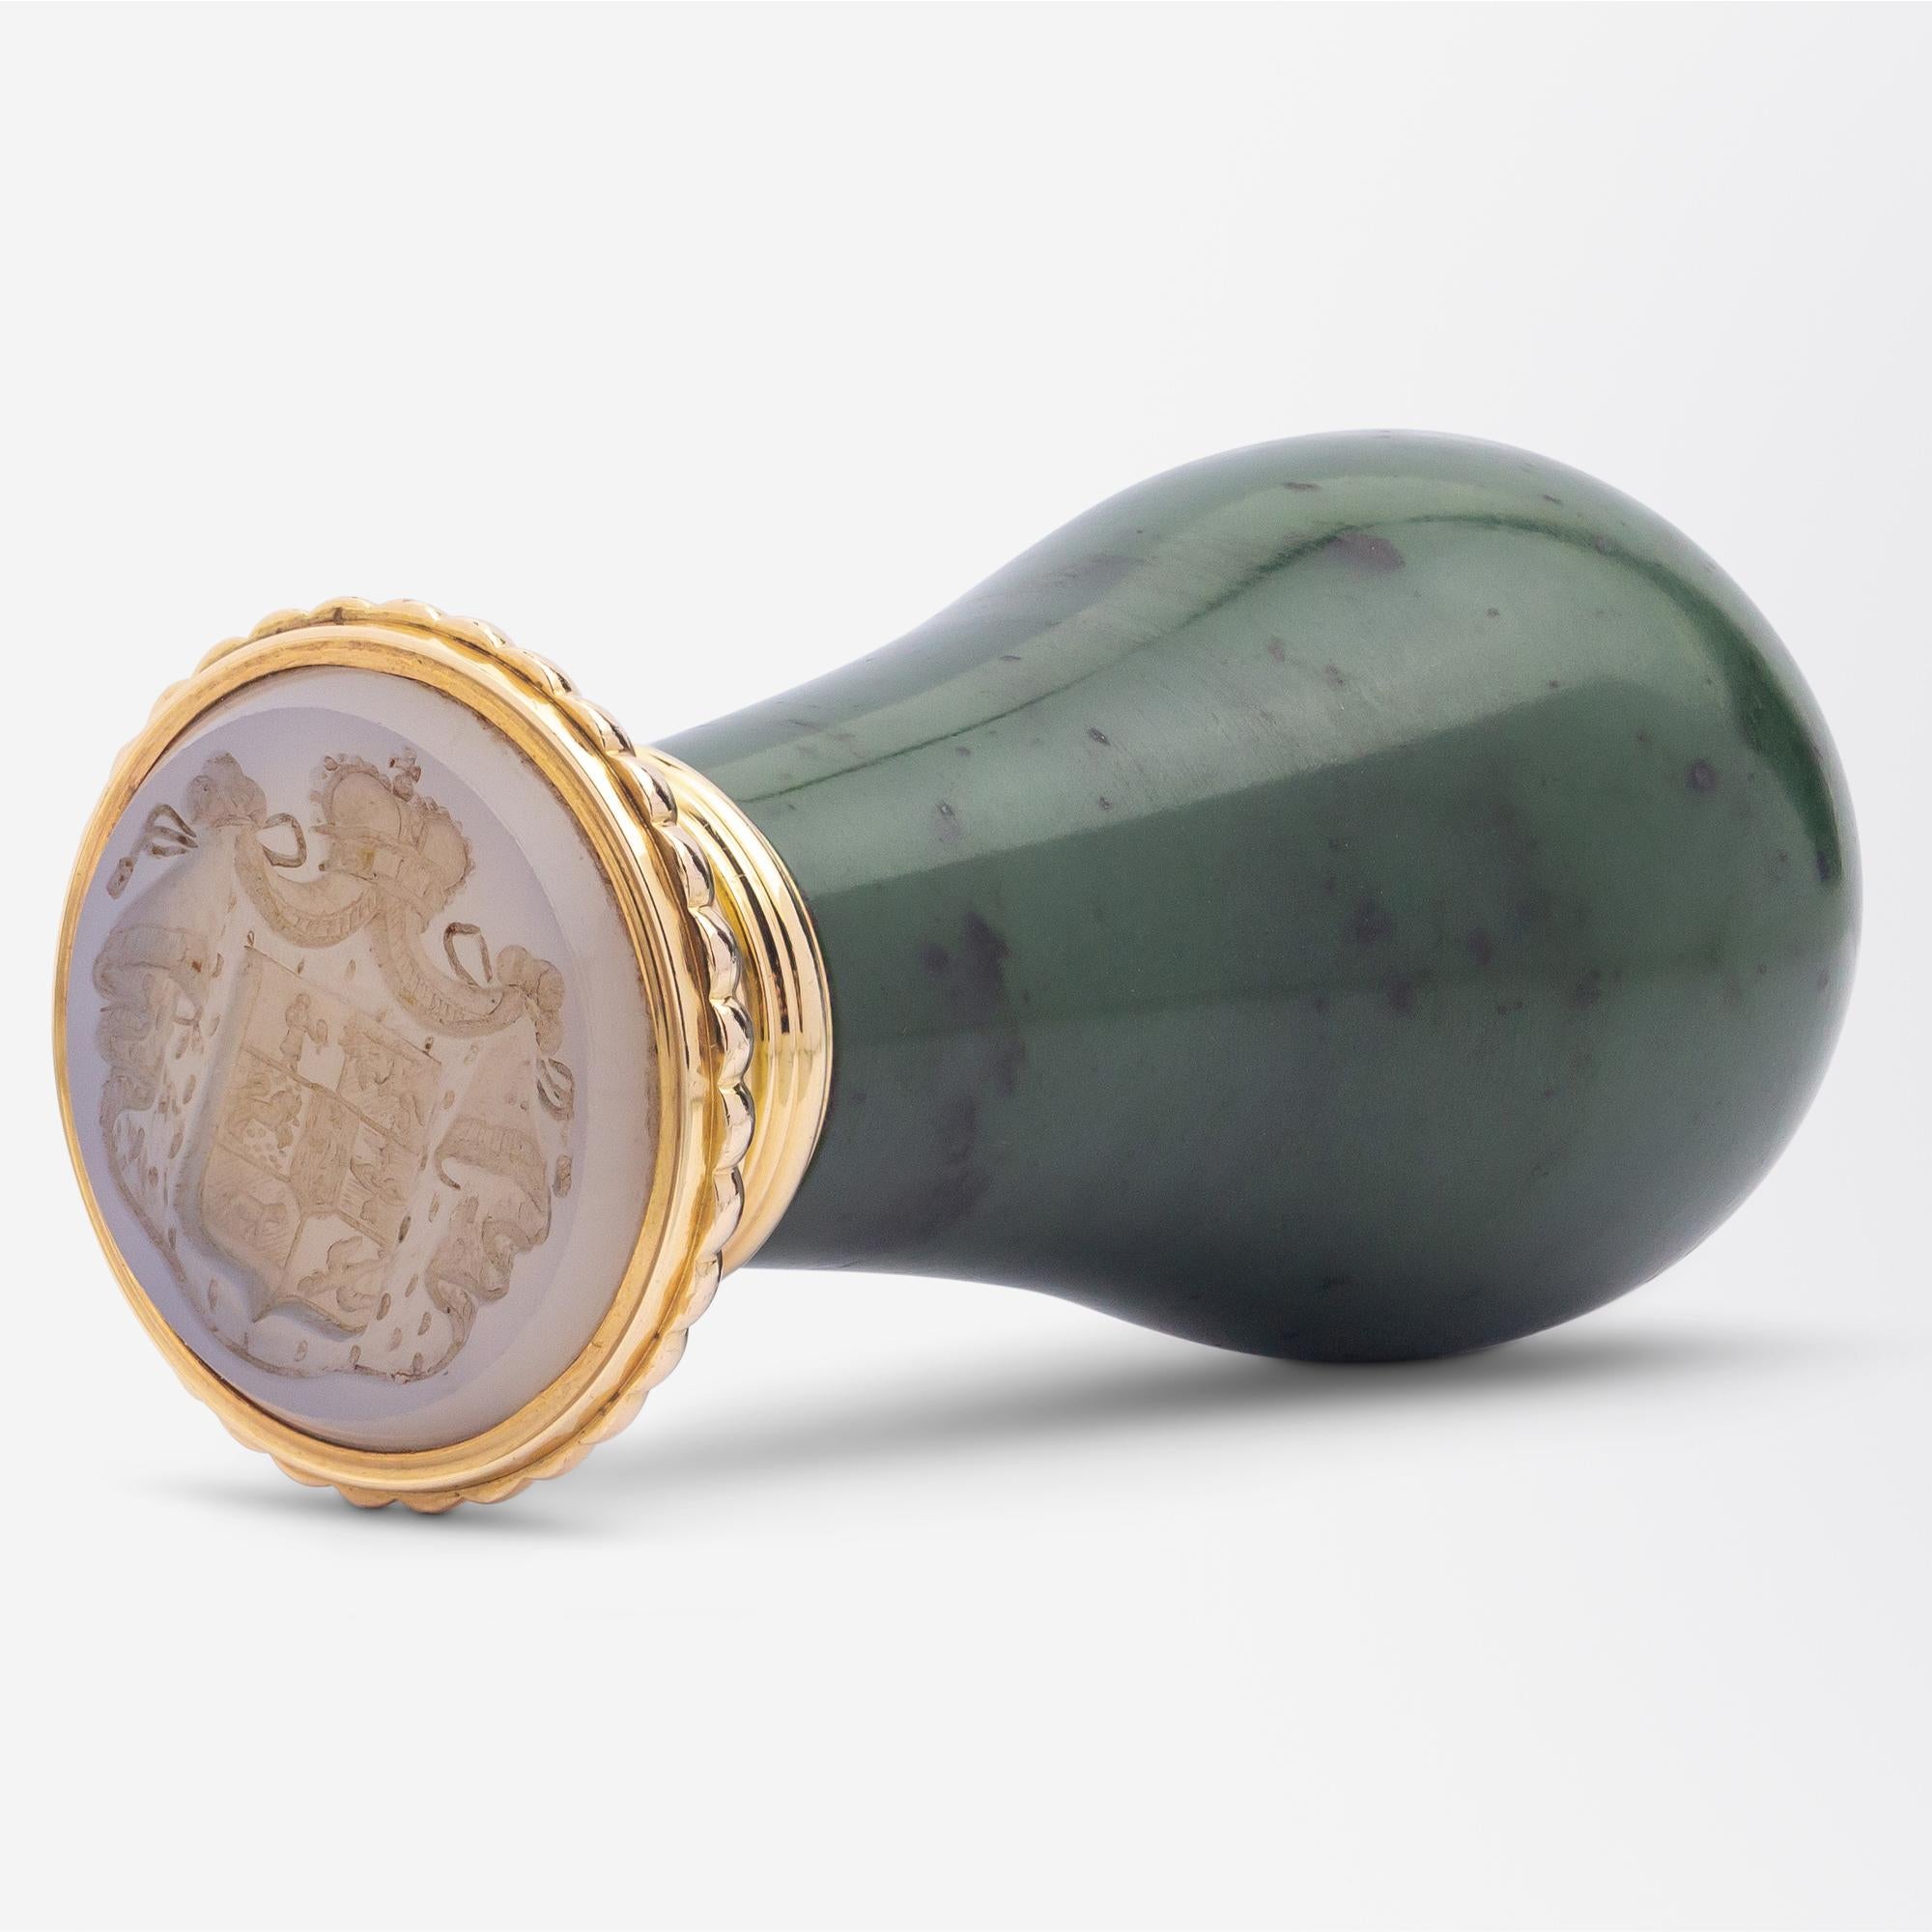 Uncut Russian 'Imperial Period', Nephrite Jade, Gold and White Chalcedony Desk Seal